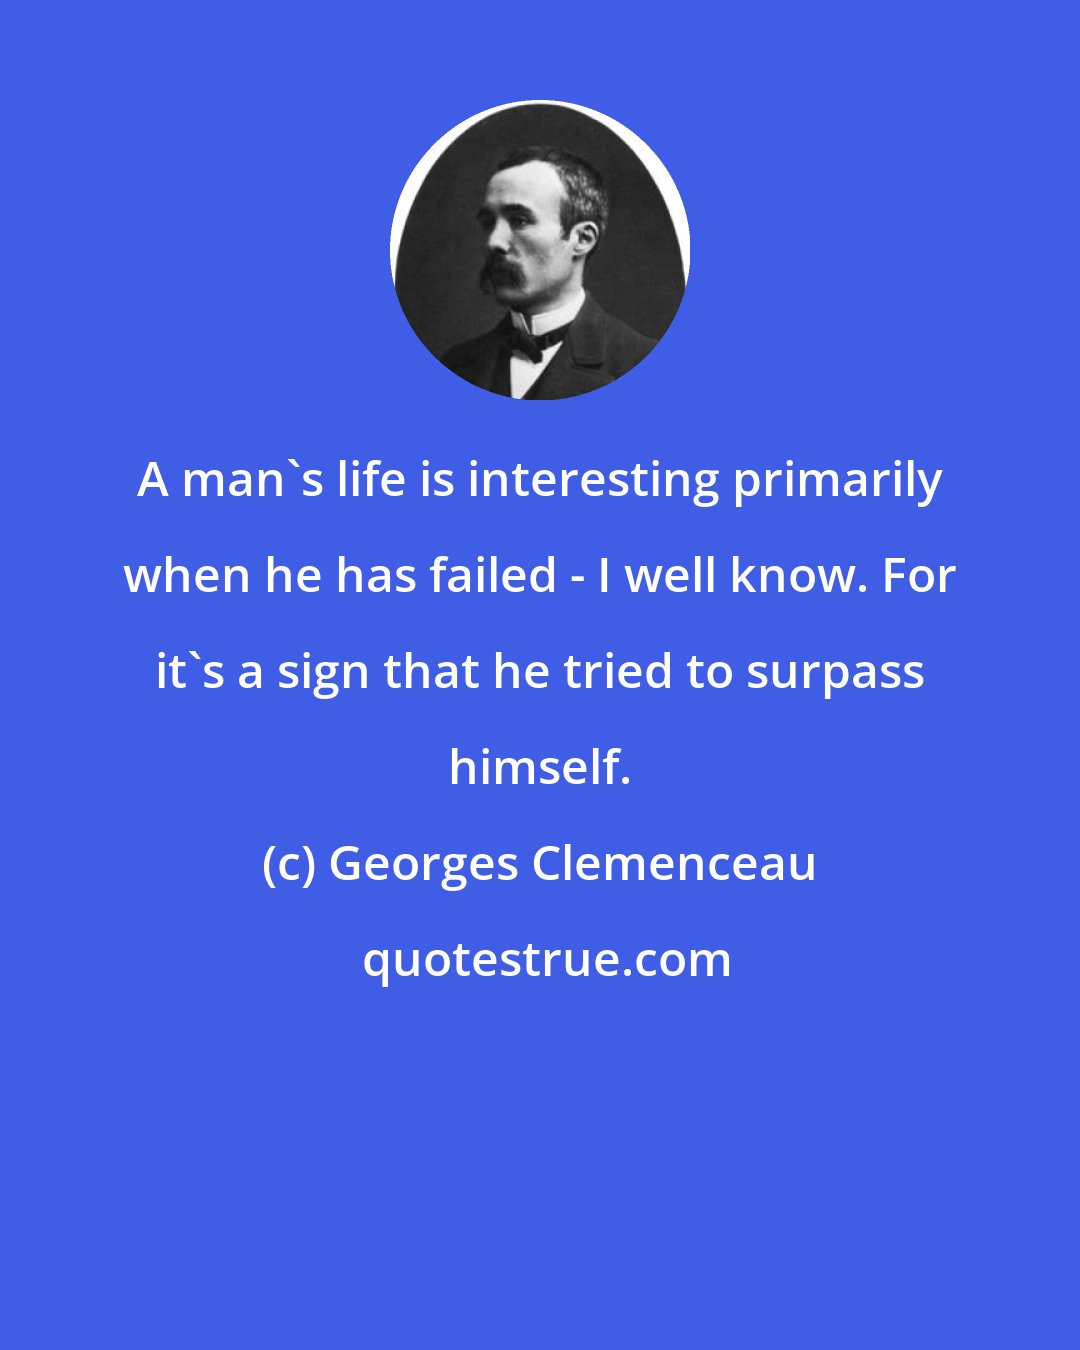 Georges Clemenceau: A man's life is interesting primarily when he has failed - I well know. For it's a sign that he tried to surpass himself.